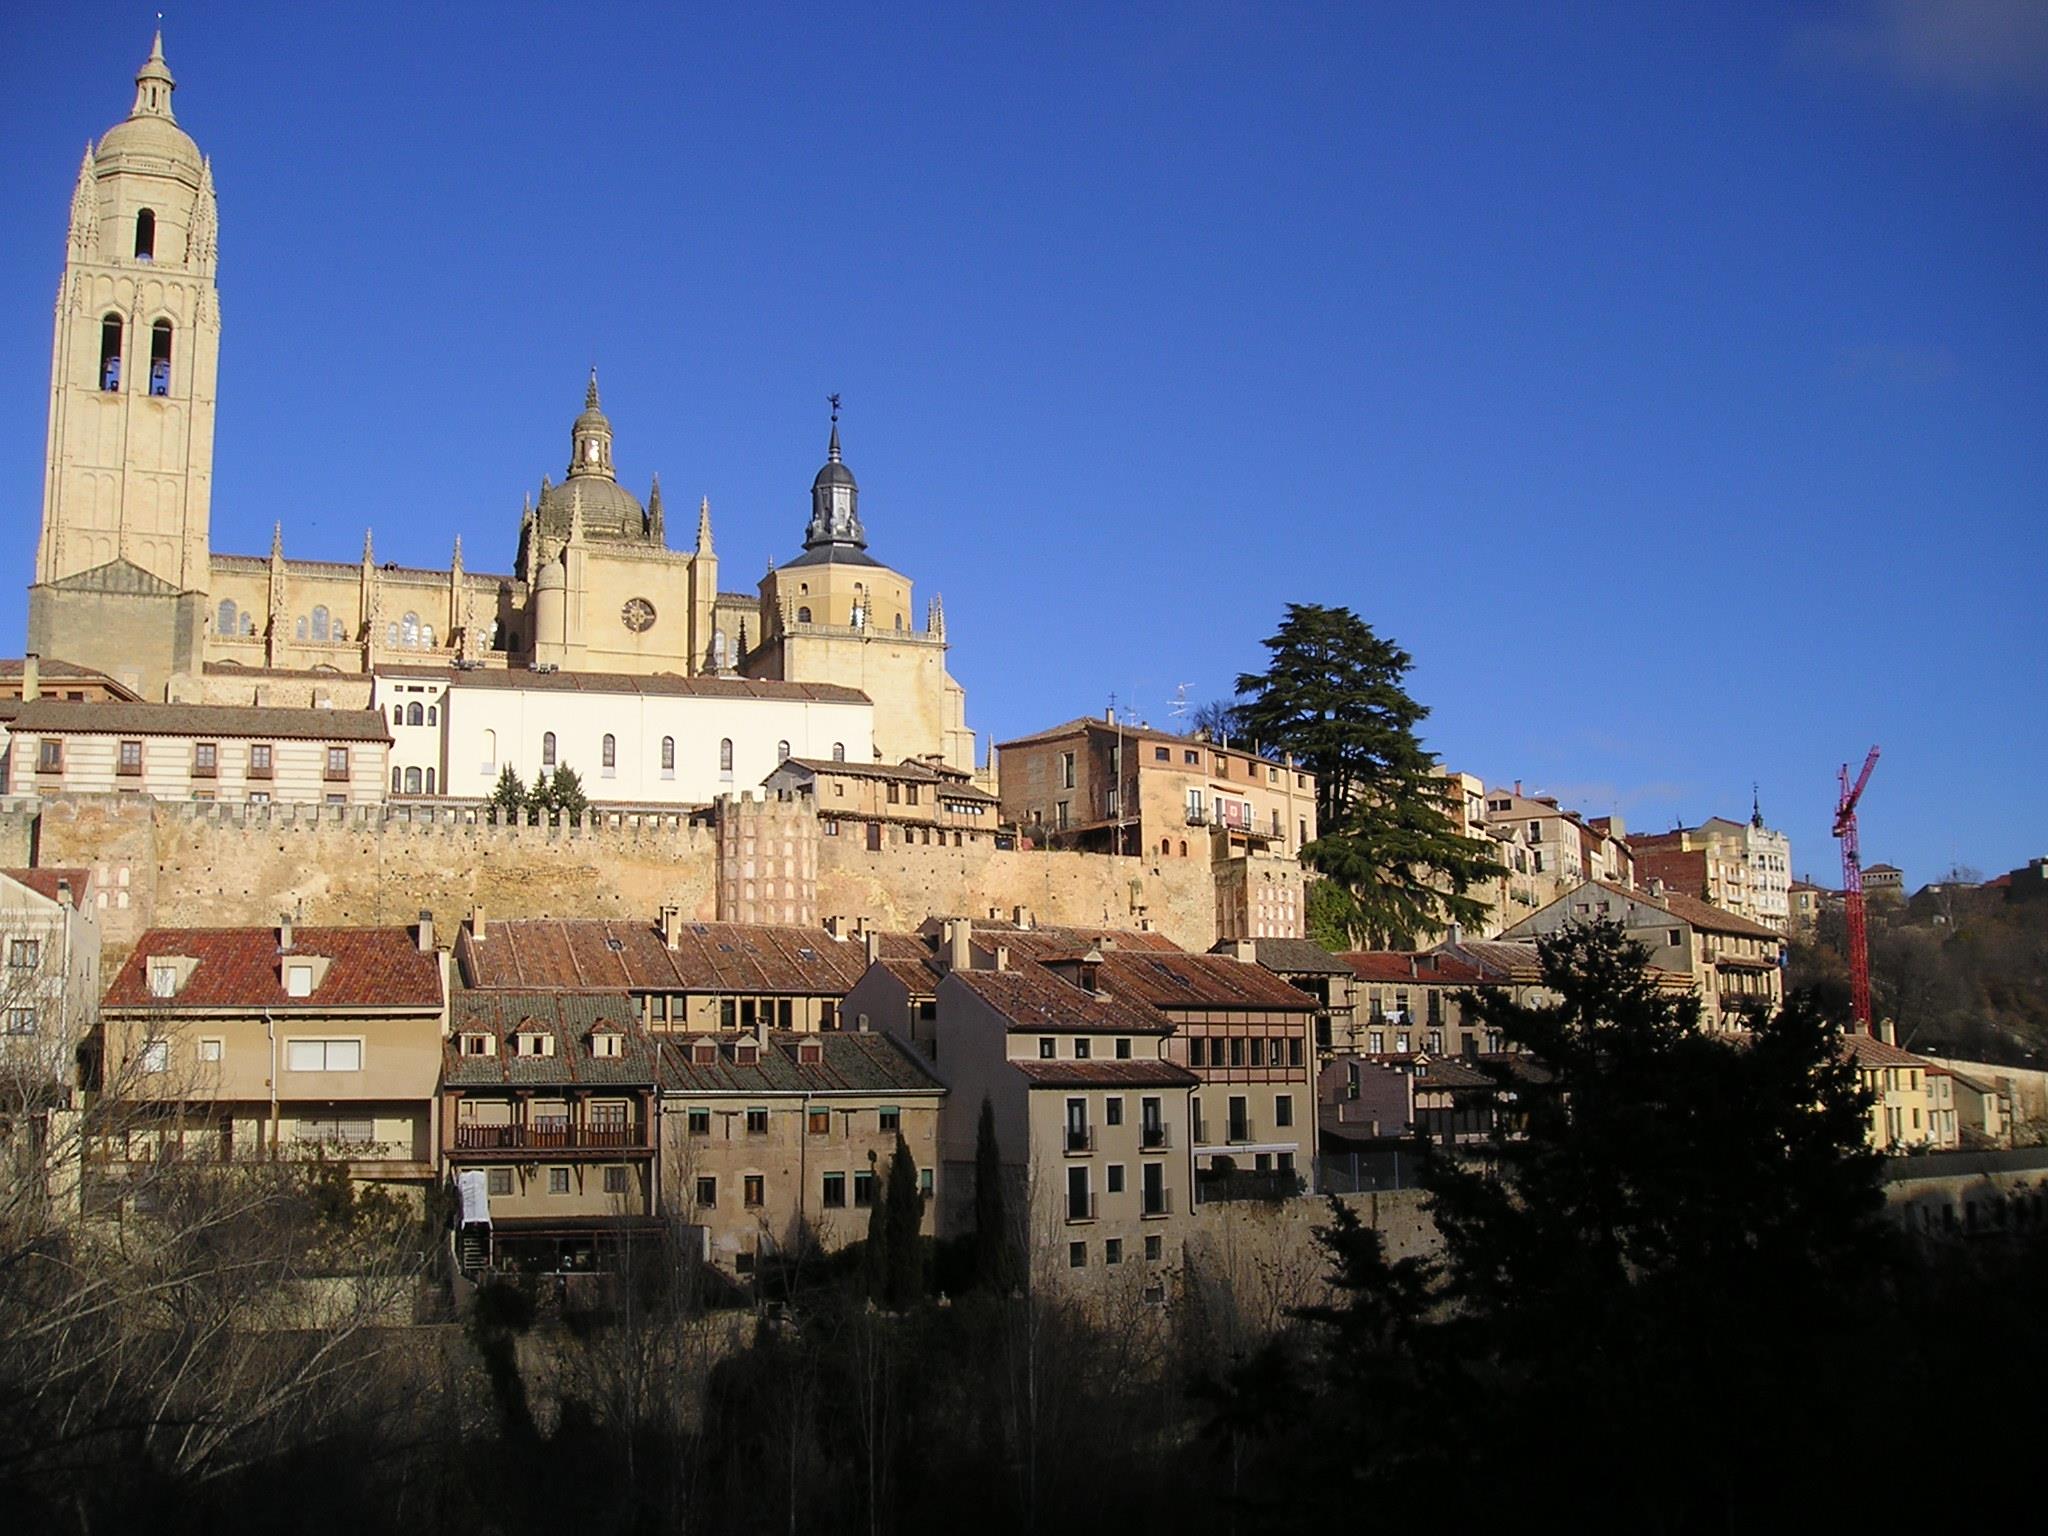 Tour of Segovia, traces of the past